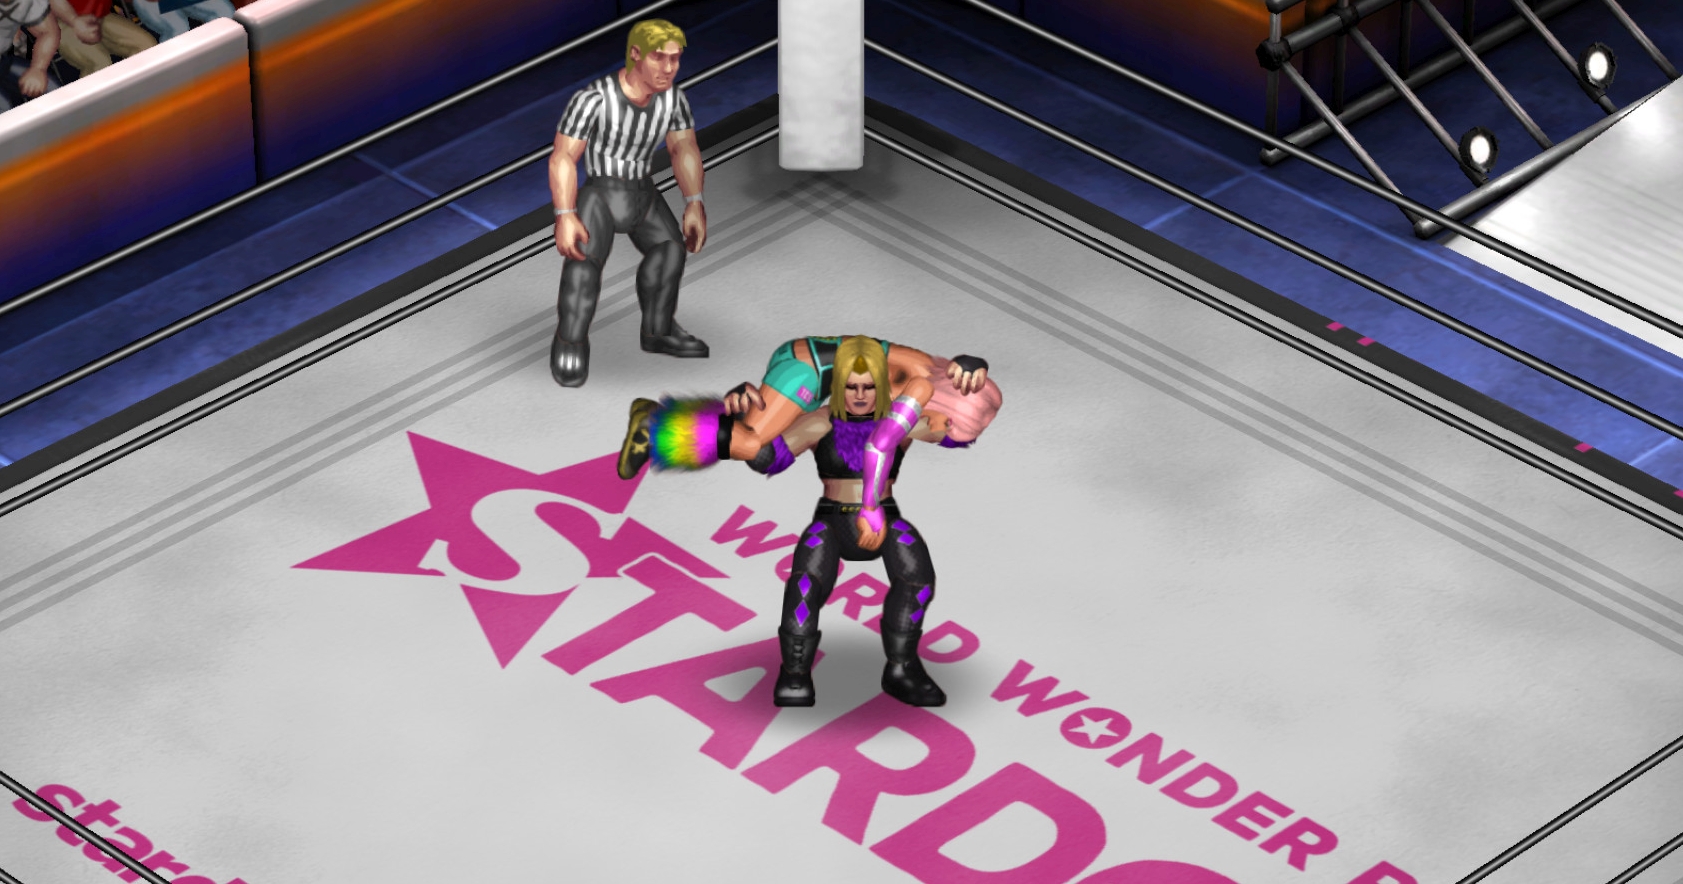 Stardom Wrestler and the release date for the next Fire Pro Wrestling World DLC